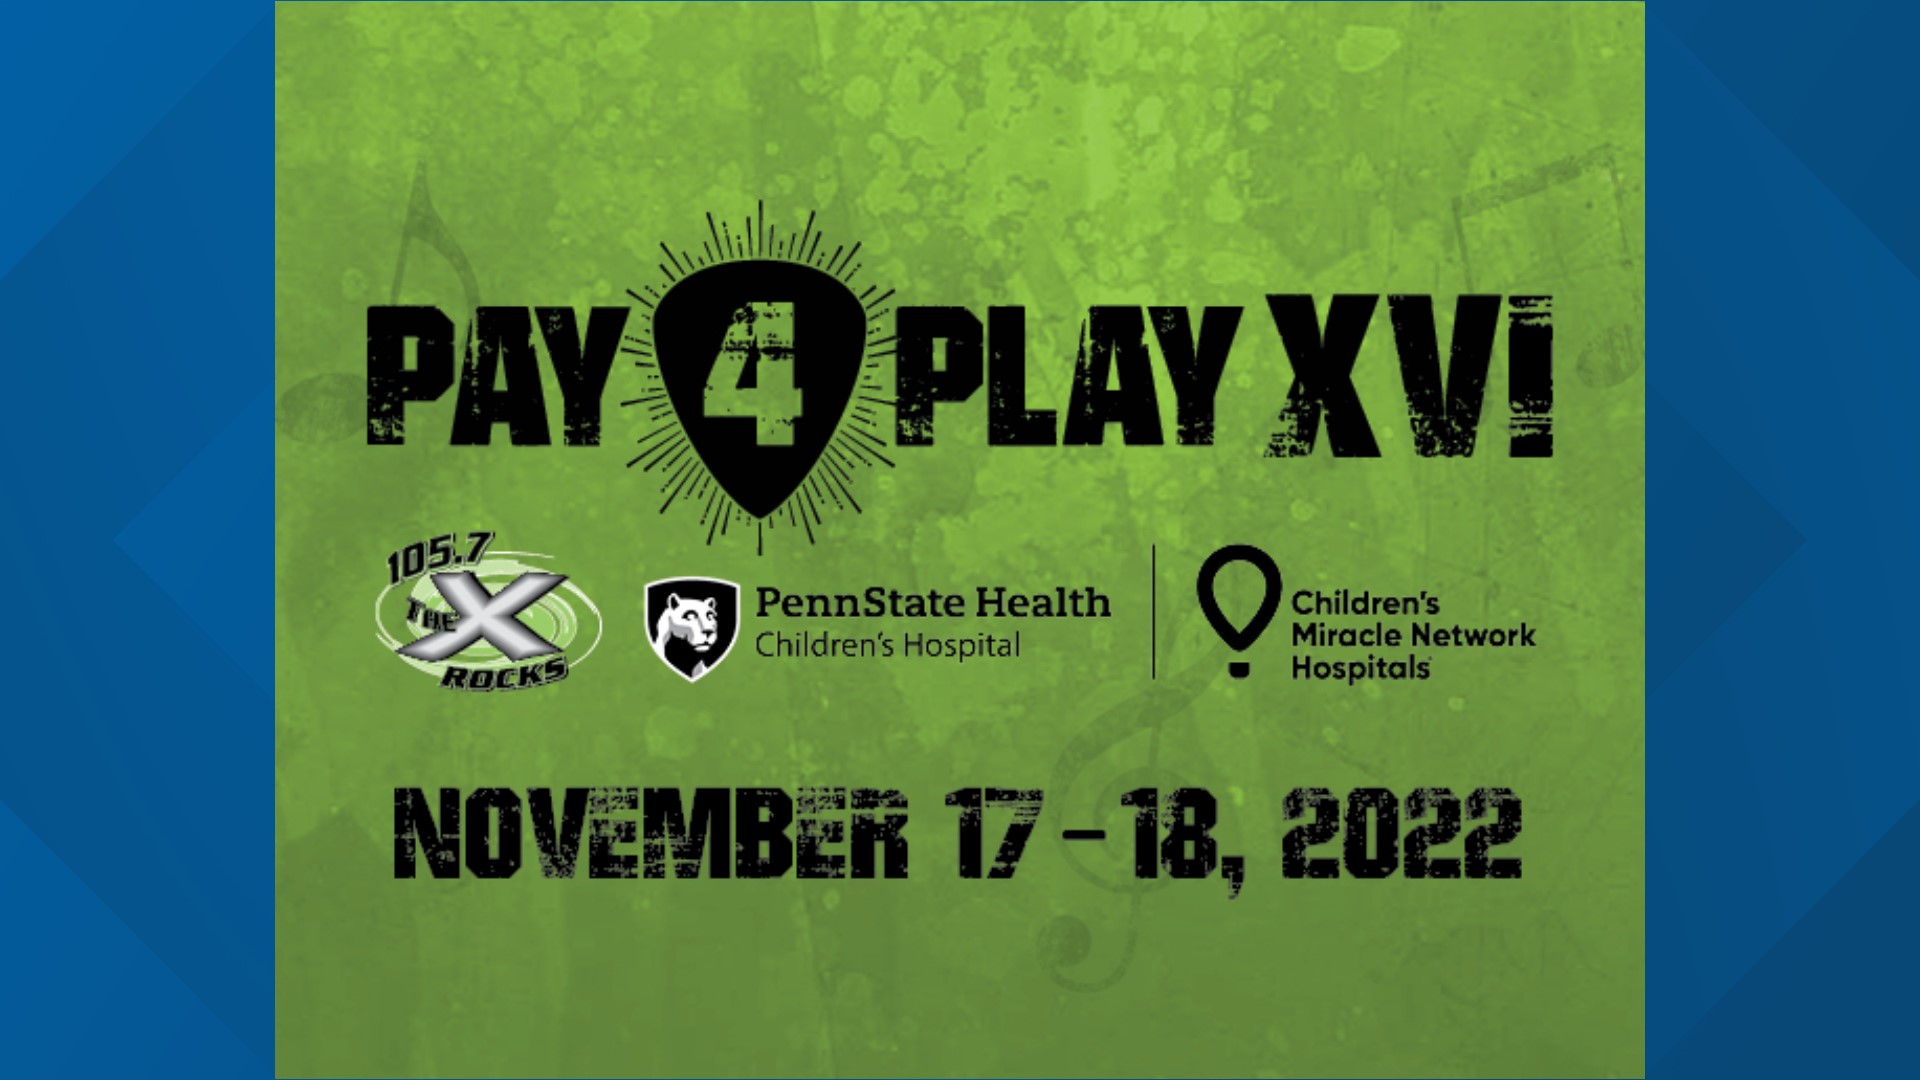 WQXA-FM The X is teaming up with Penn State Health Children’s Hospital to raise money to benefit Children’s Miracle Network Hershey.